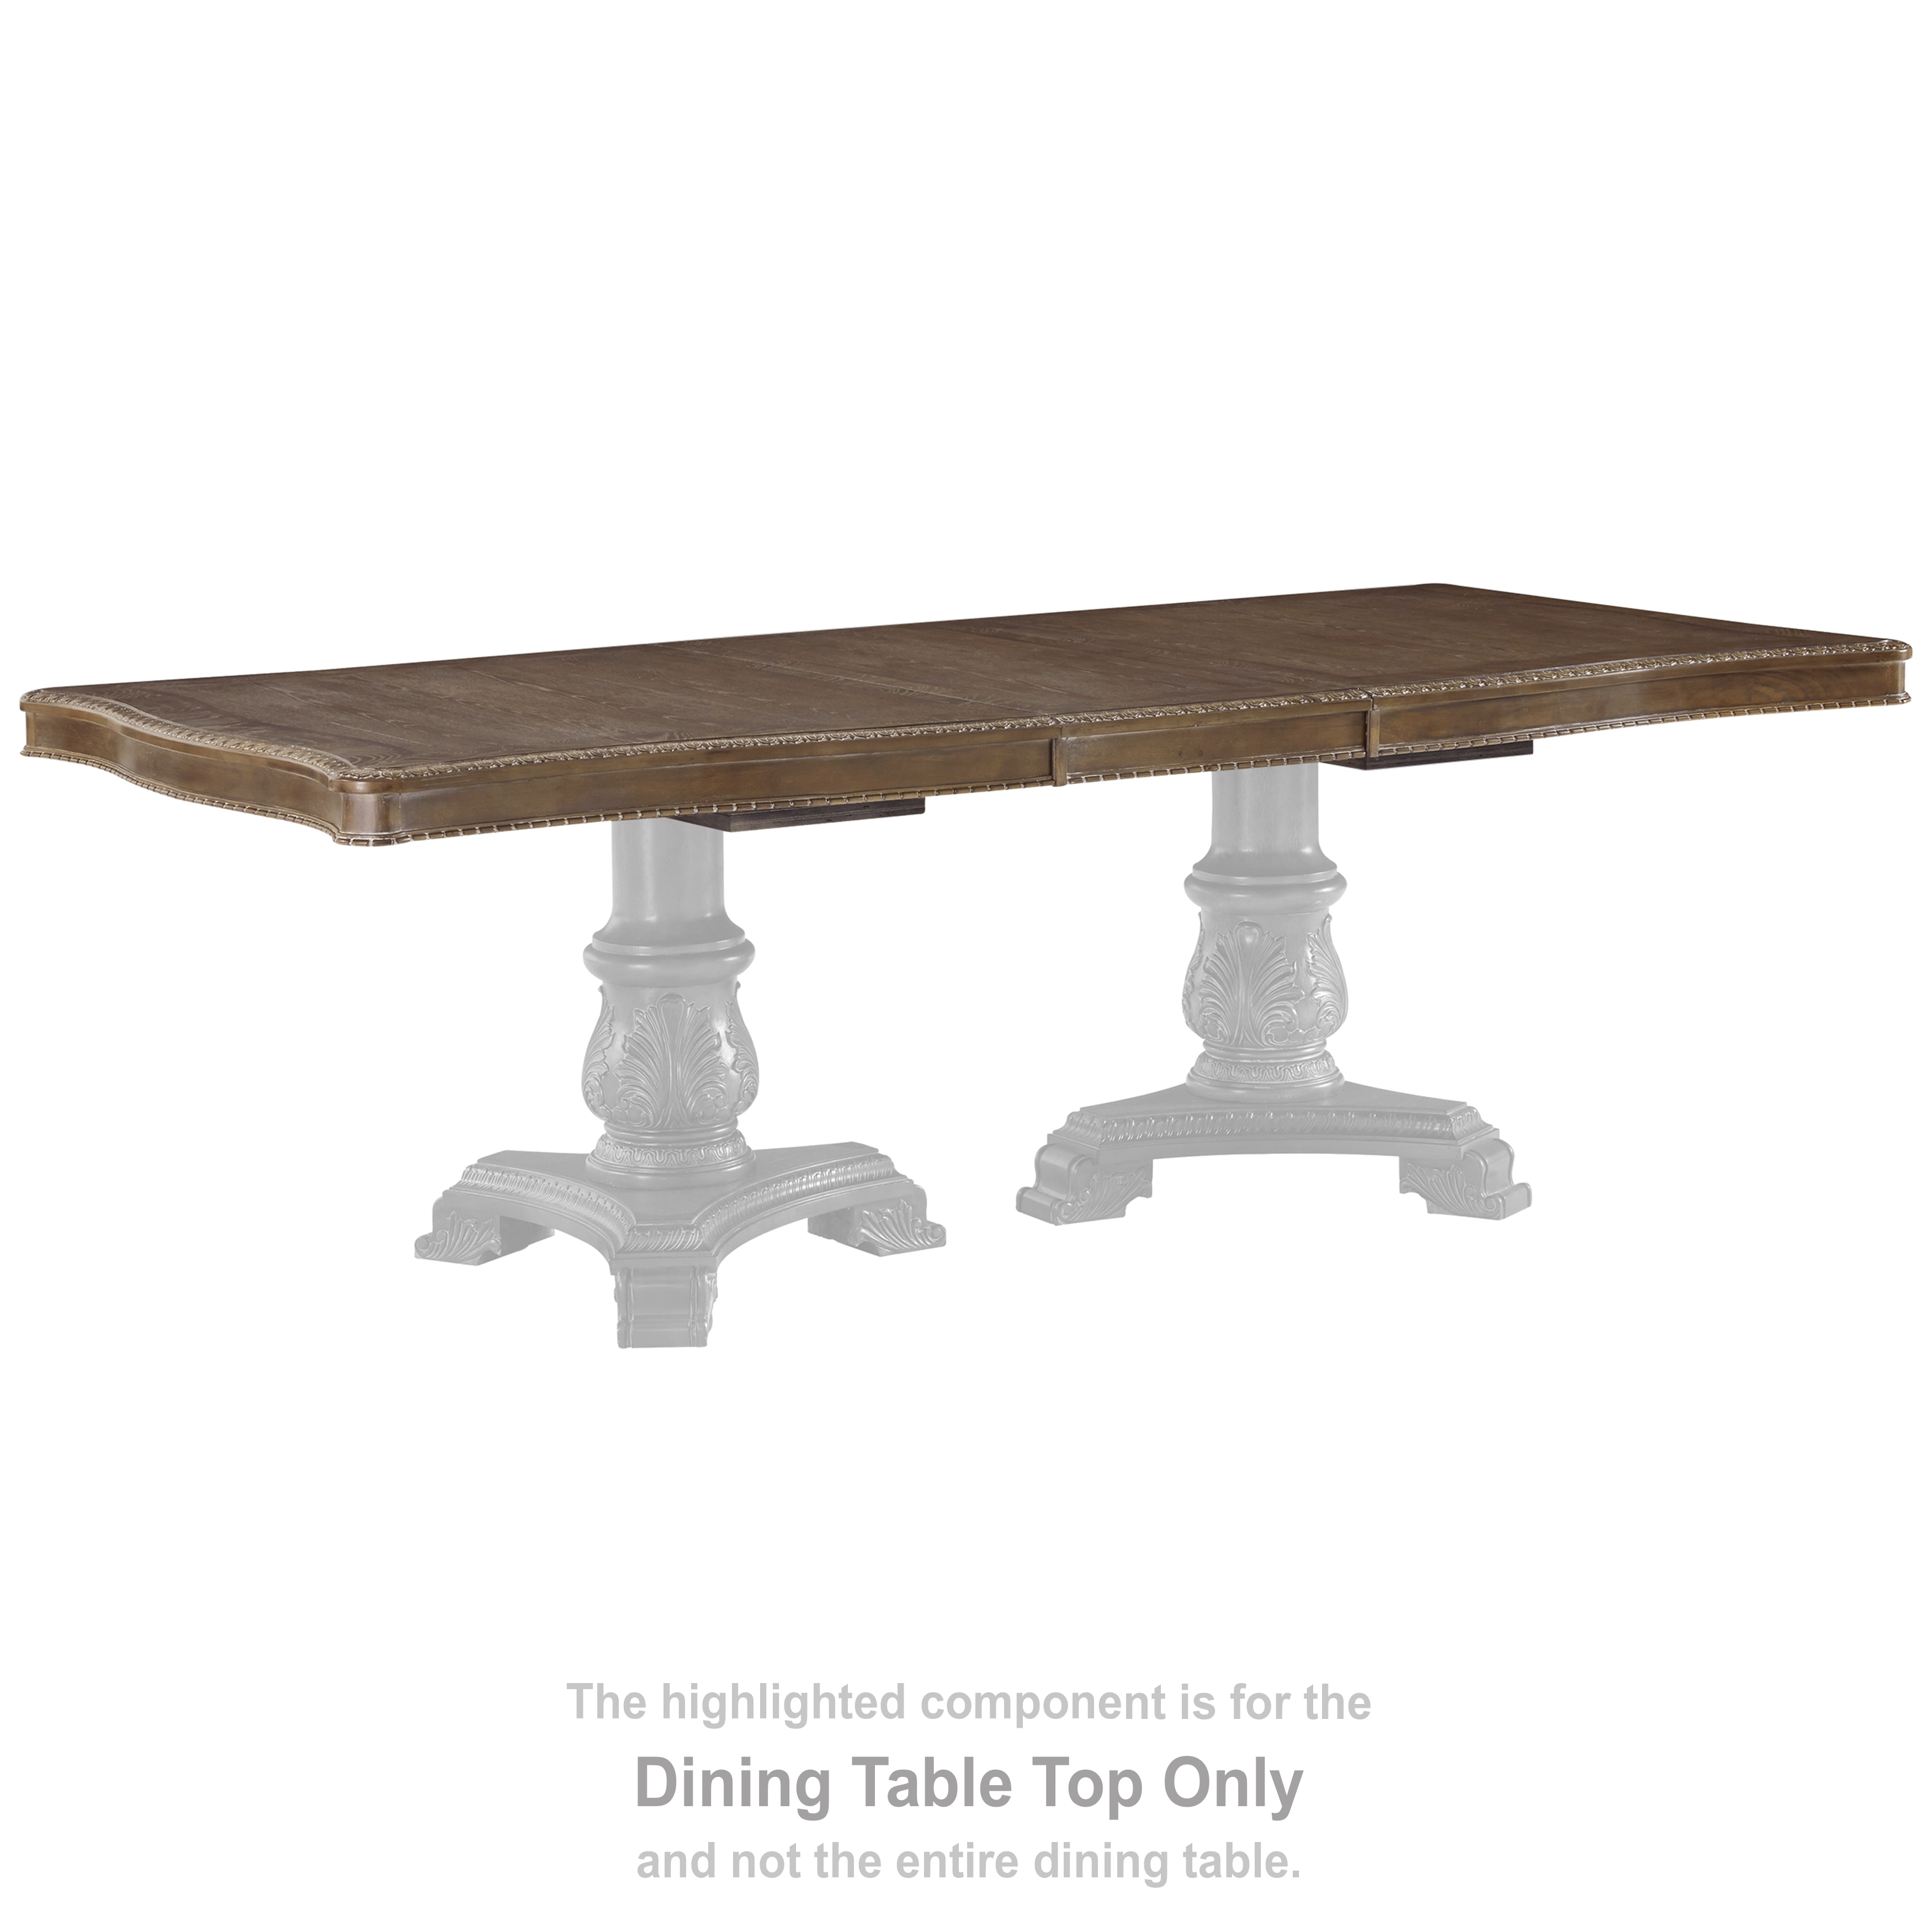 Wood and Resin Table Top for Dining Table Decoration